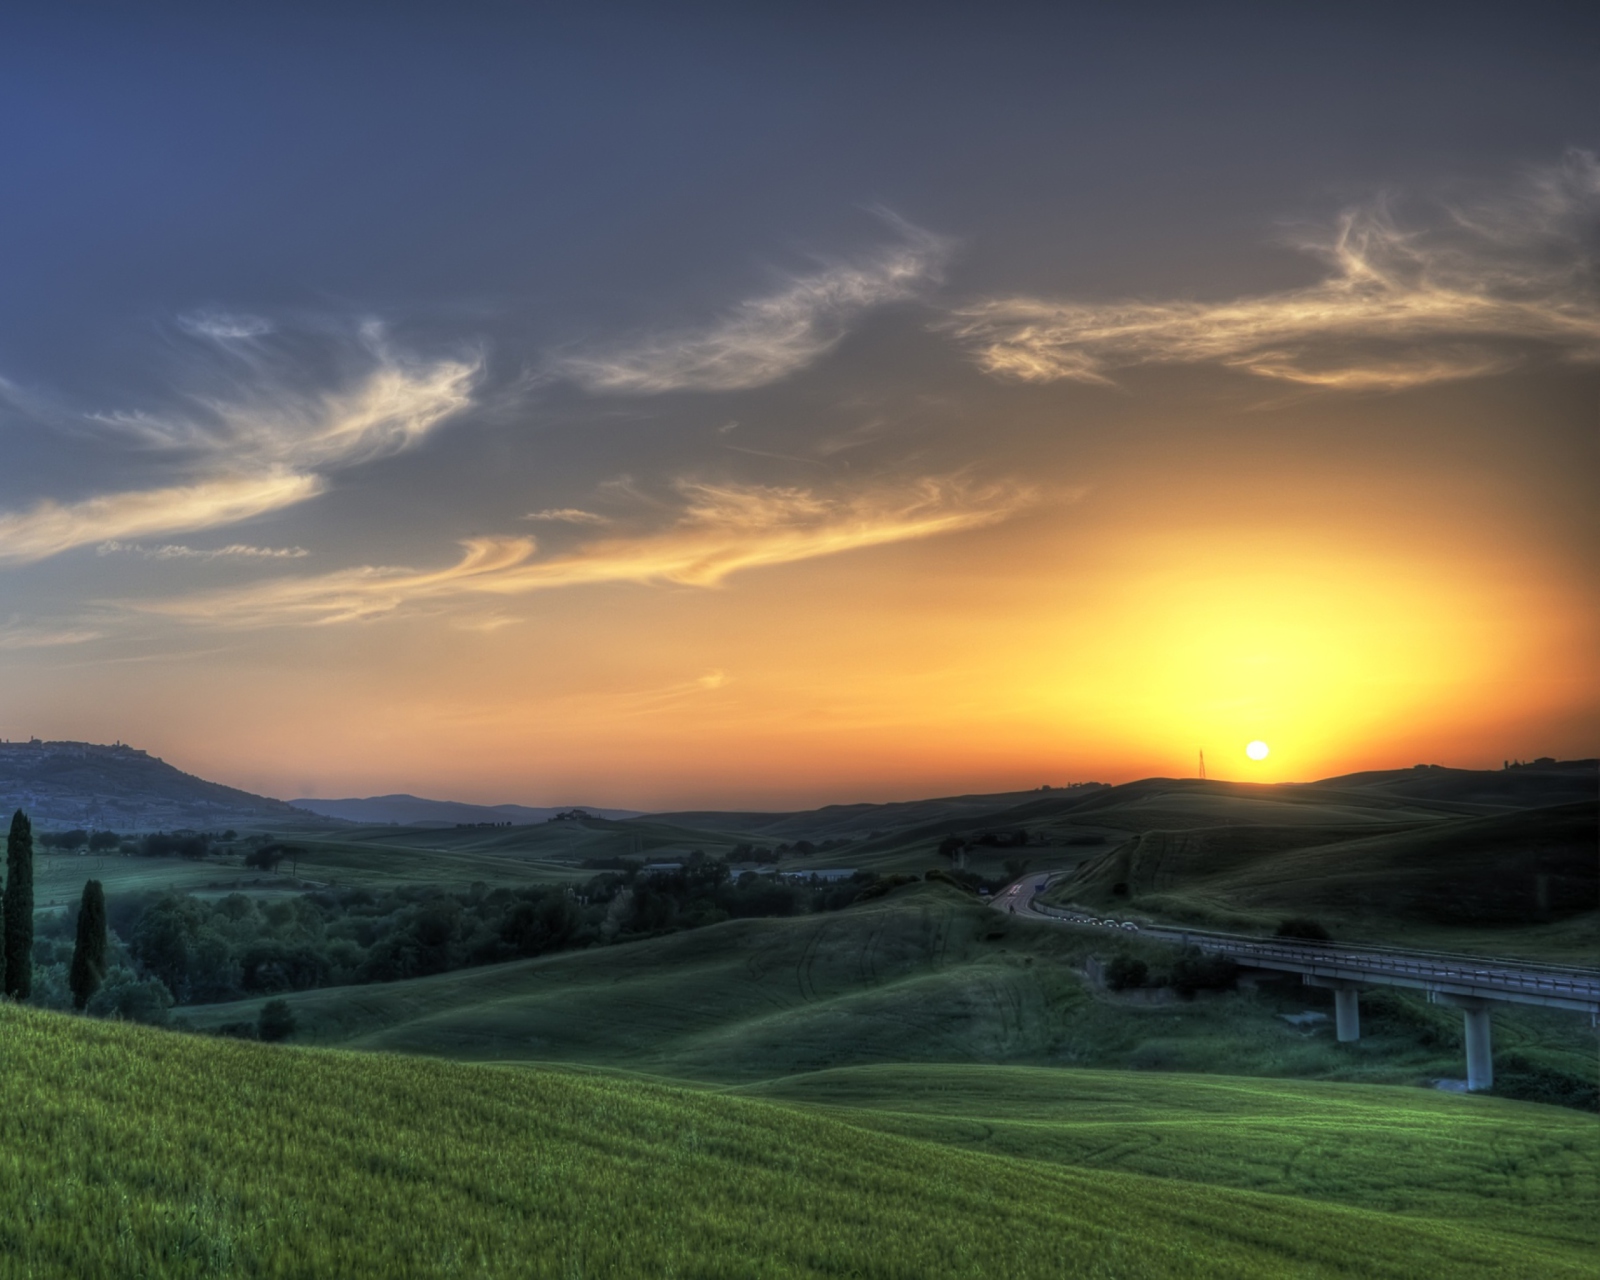 Sunset In Tuscany wallpaper 1600x1280